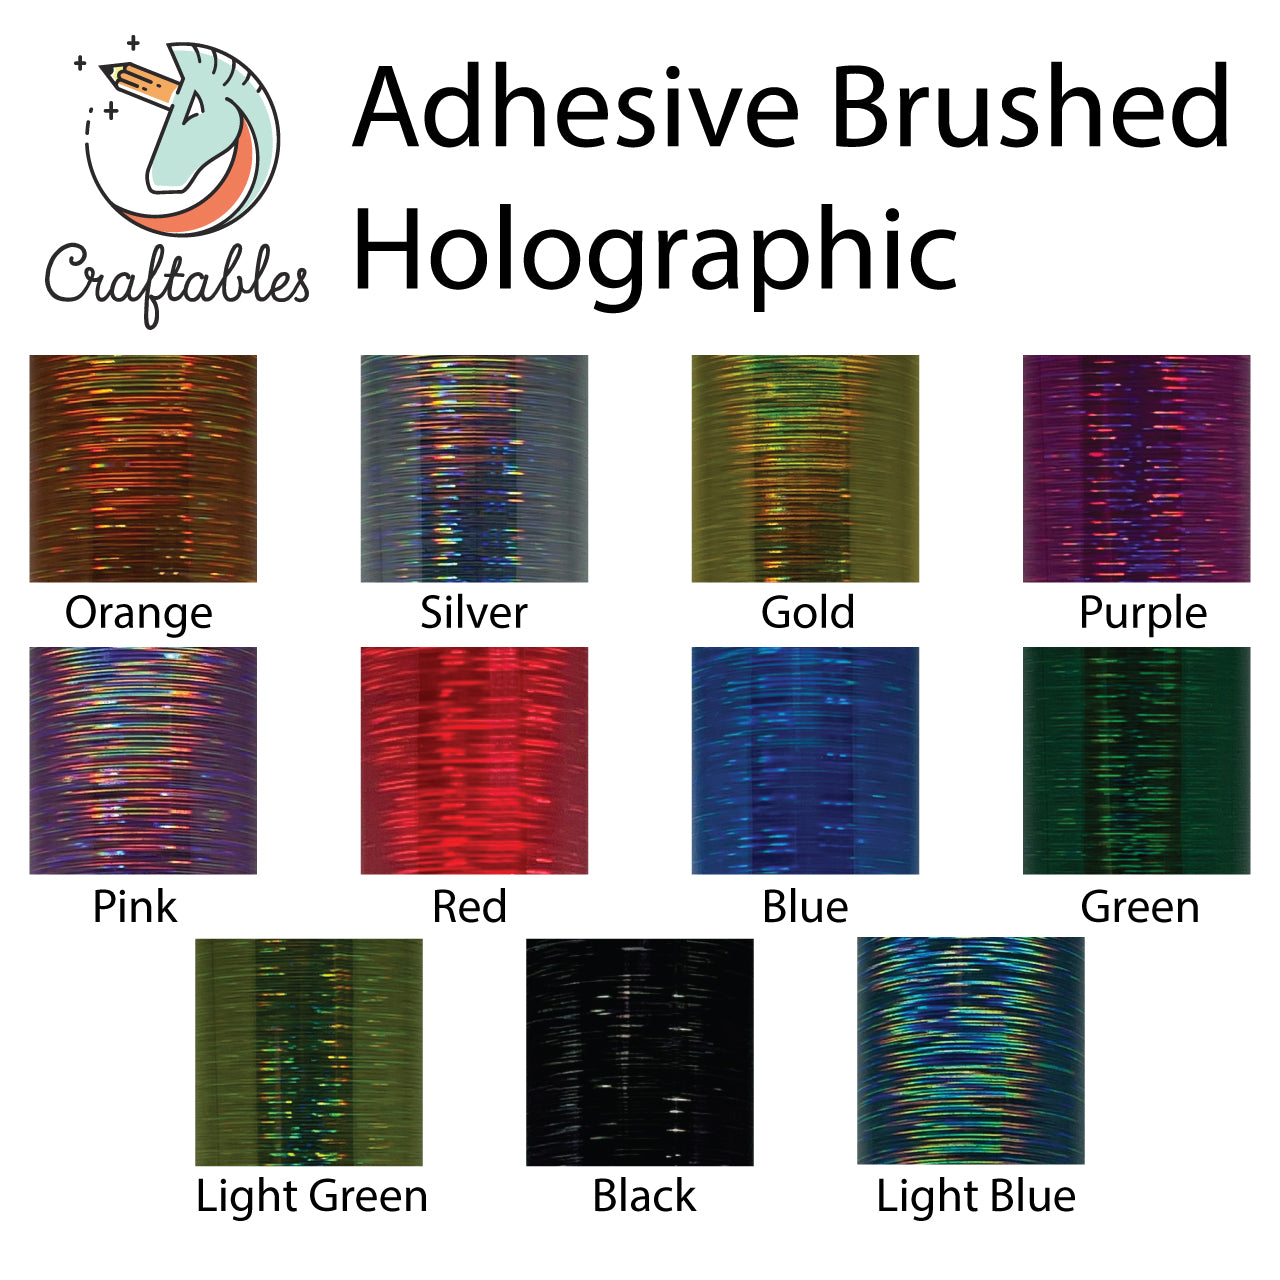 Gold Brushed Holographic Adhesive Vinyl Sheets By Craftables